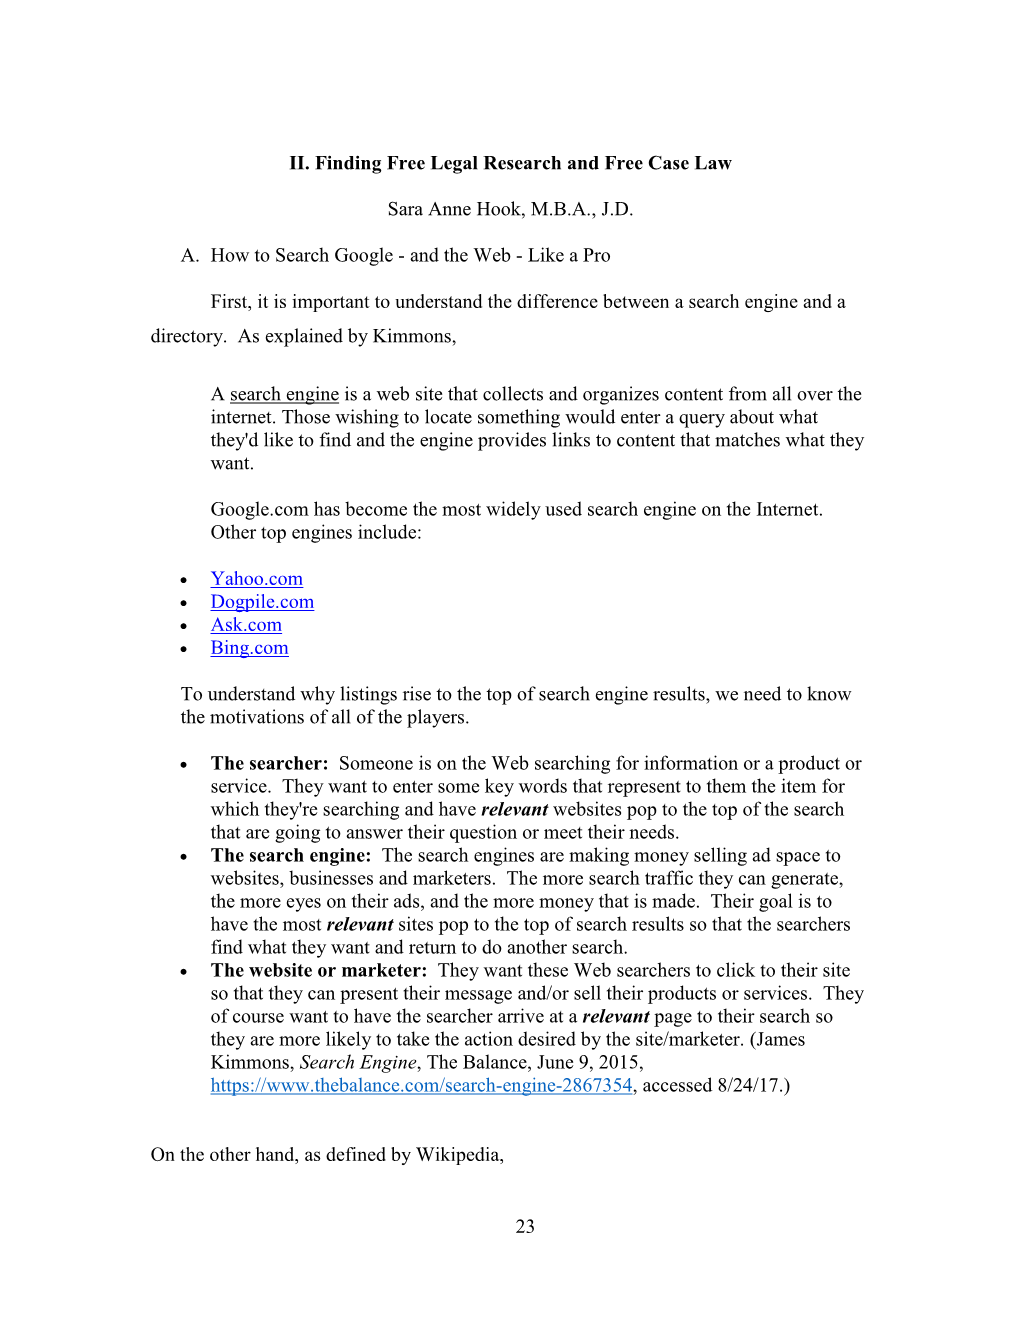 23 II. Finding Free Legal Research and Free Case Law Sara